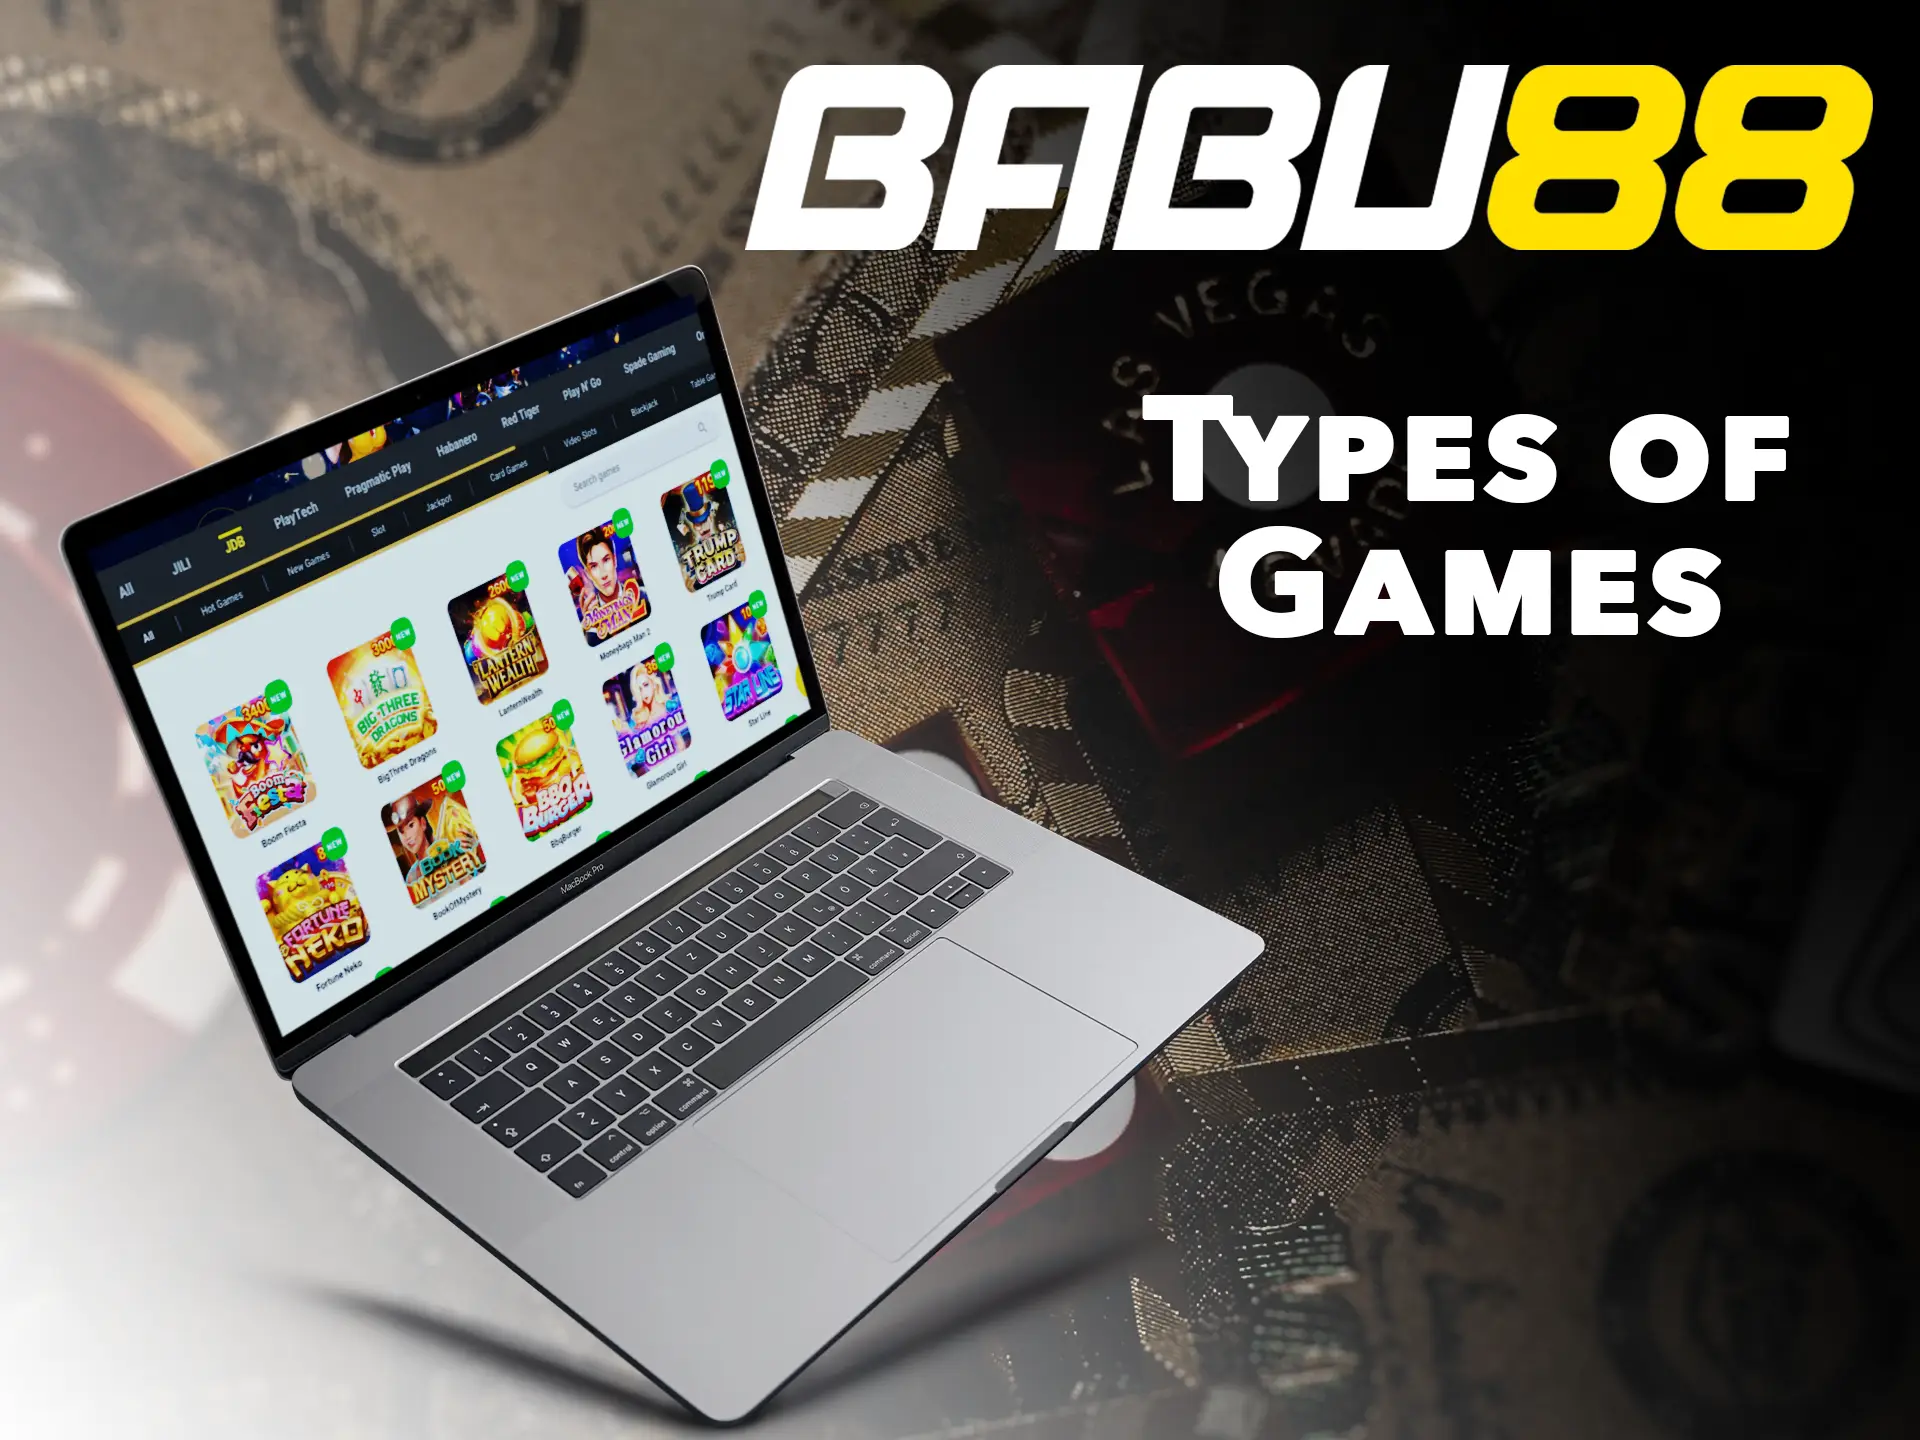 Babu88 will allow you to dive headfirst into the diverse world of casinos with entertainment for all tastes.